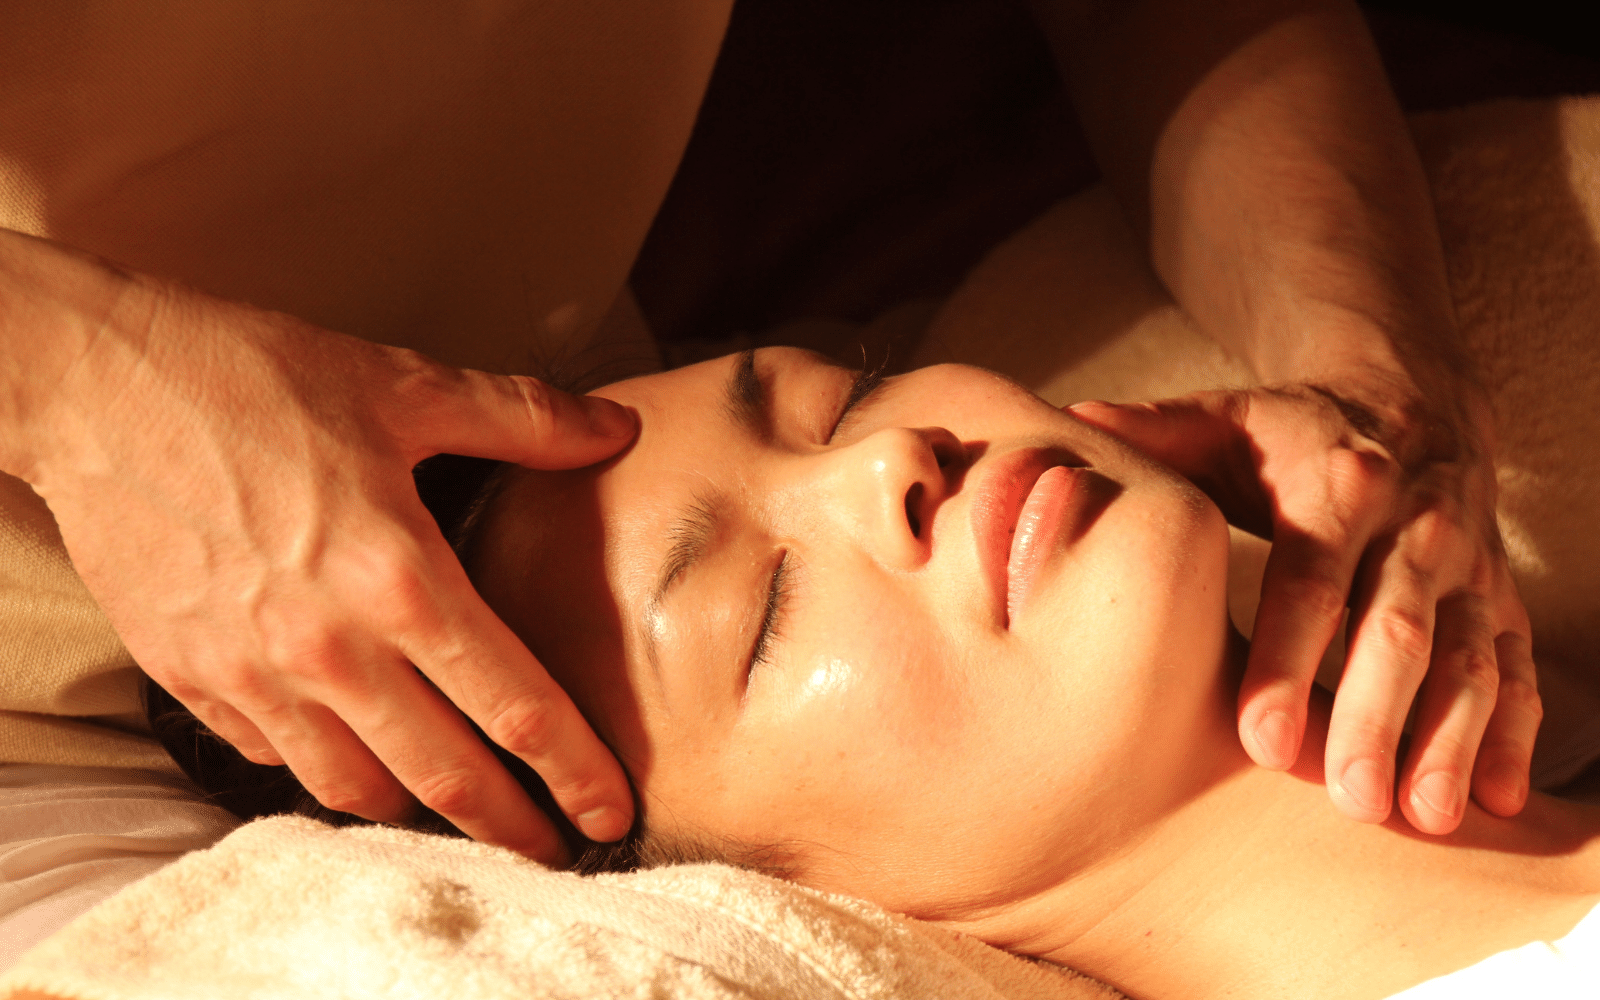 seek THE WILDNESS to nourish skin and soul woman at a spa receiving a facial